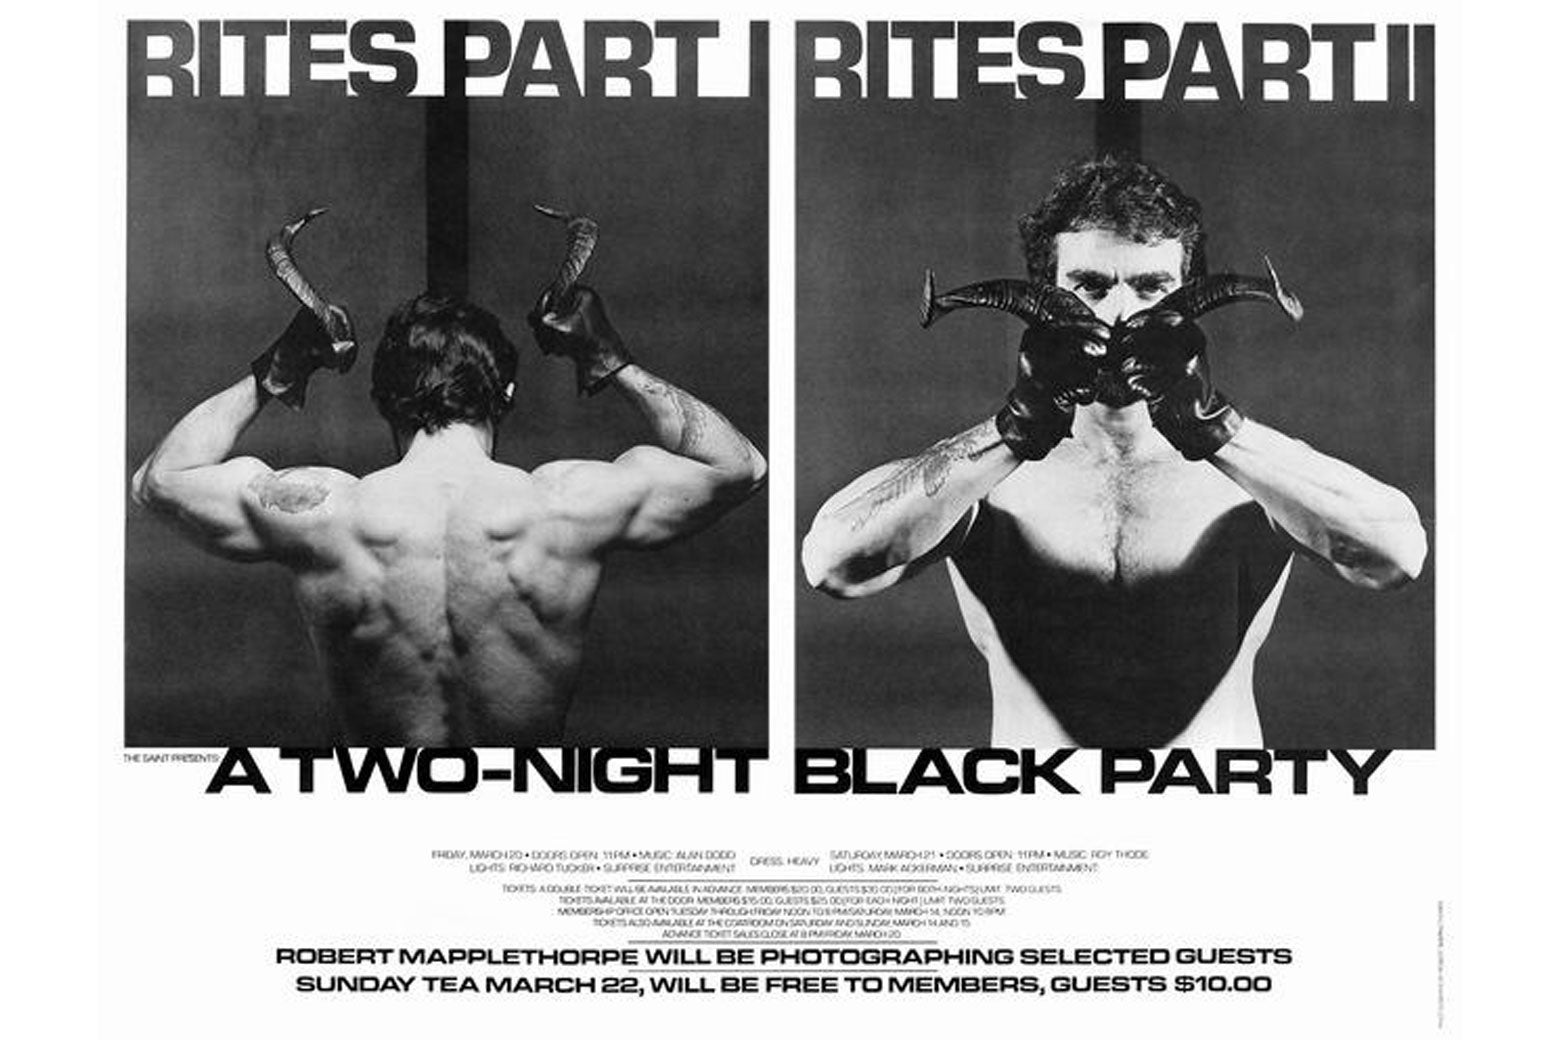 Flyer reads "BITES PART I" and "BITES PART II" over photos of a topless man holding devil horns, and below: "A TWO-NIGHT BLACK PARTY."